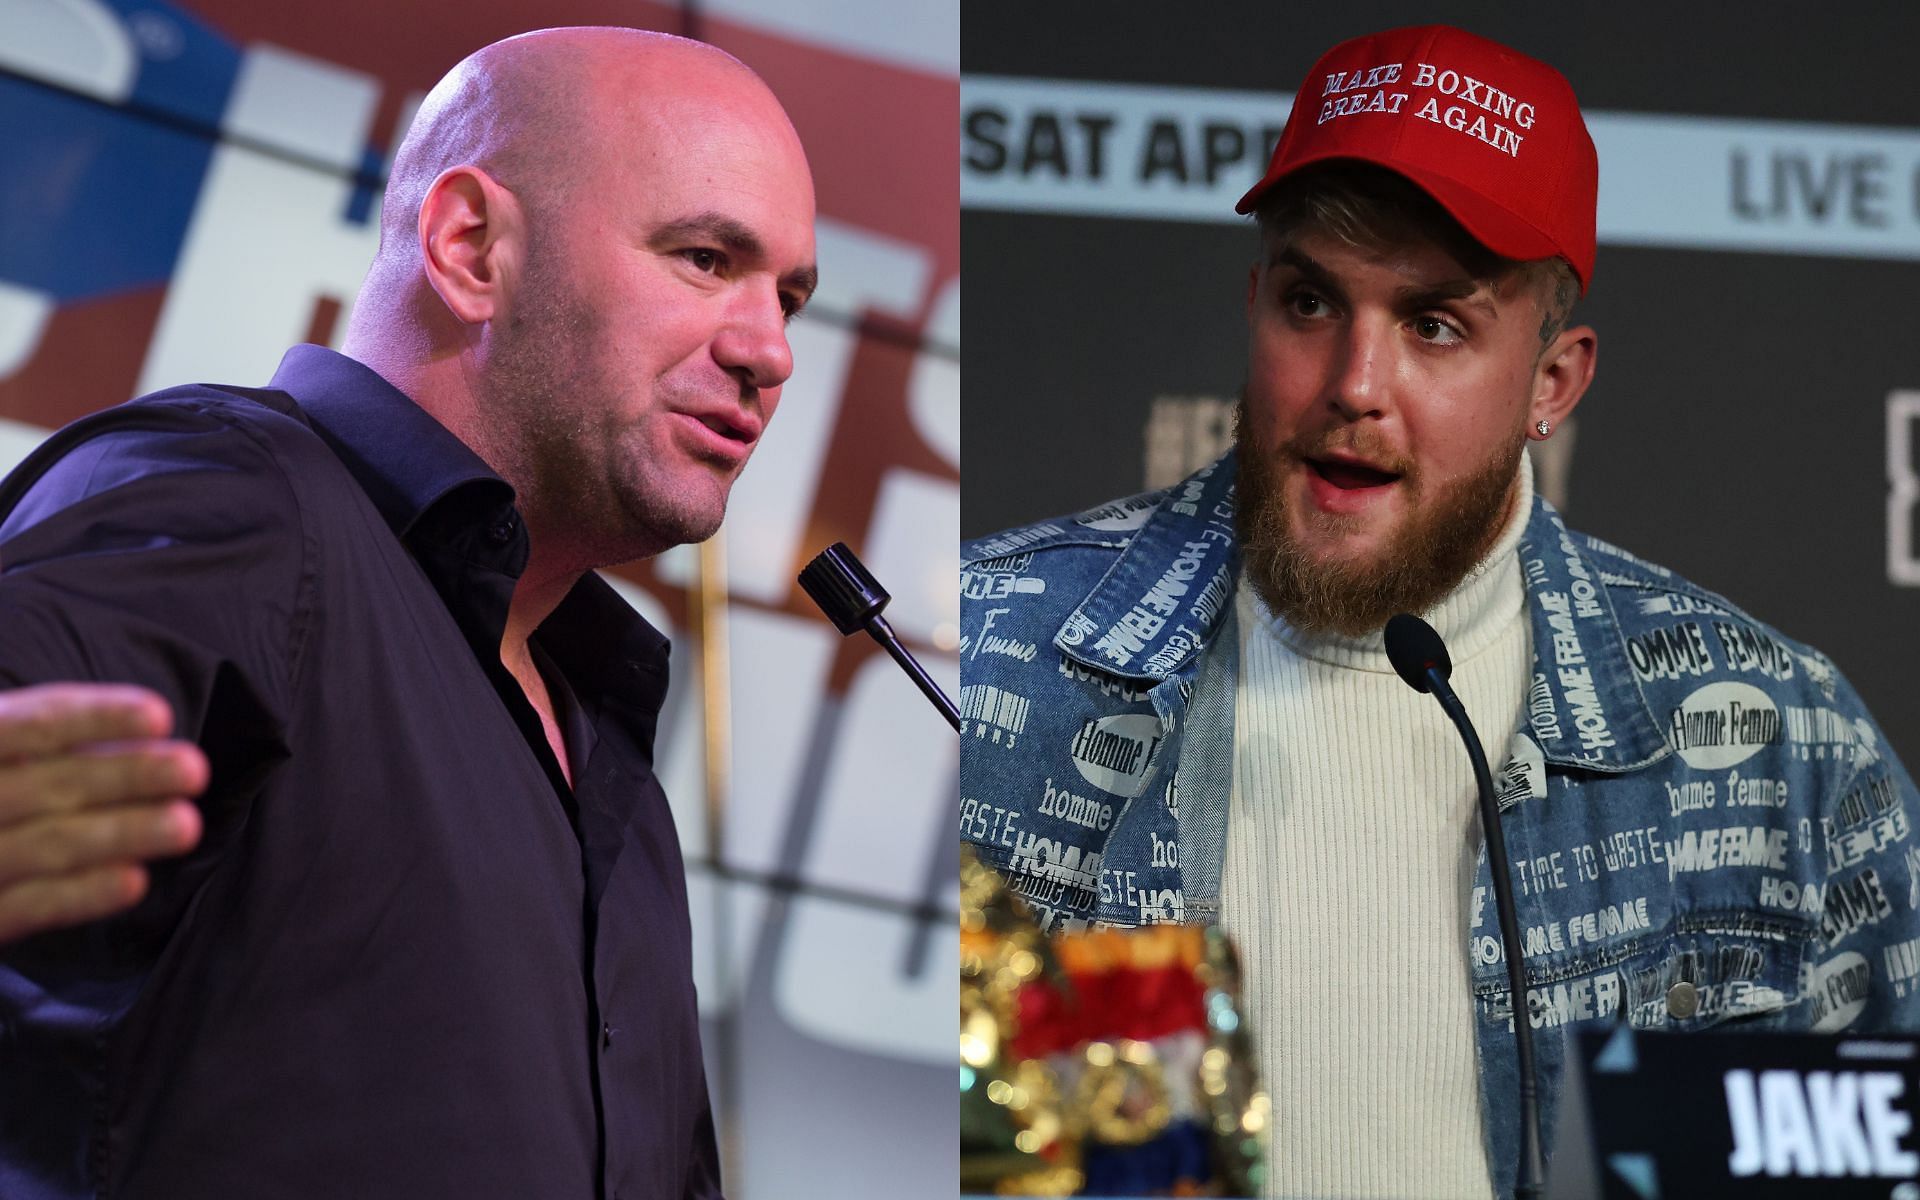 Dana White (left) and Jake Paul (right) have been at odds over subjects such as UFC fighter pay and more [Images courtesy: Getty Images]